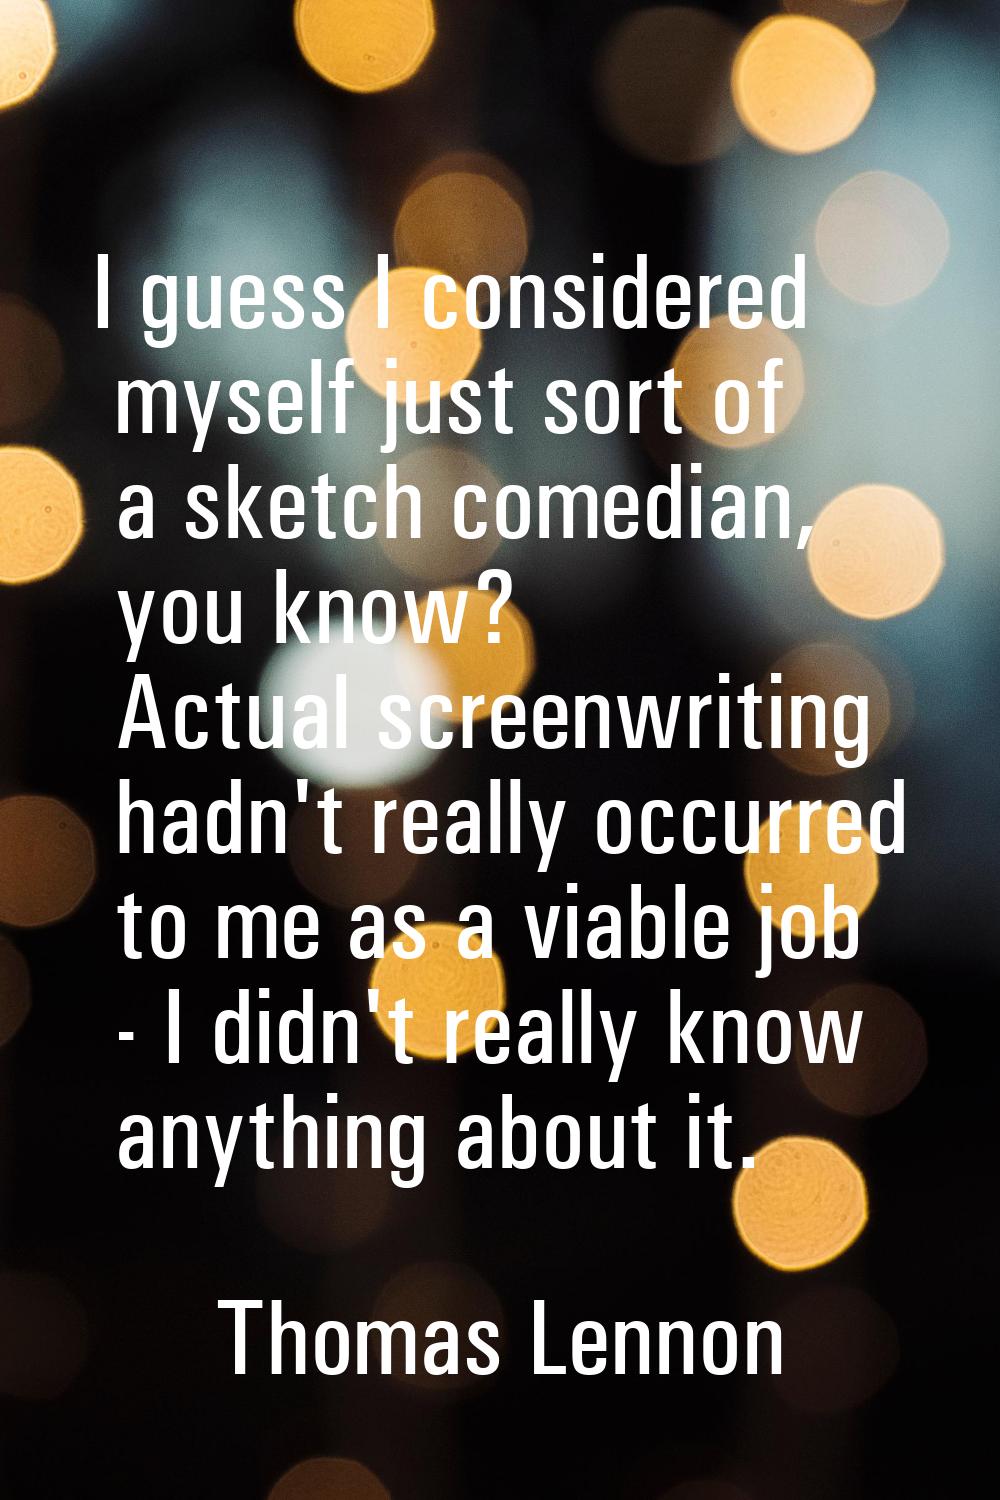 I guess I considered myself just sort of a sketch comedian, you know? Actual screenwriting hadn't r